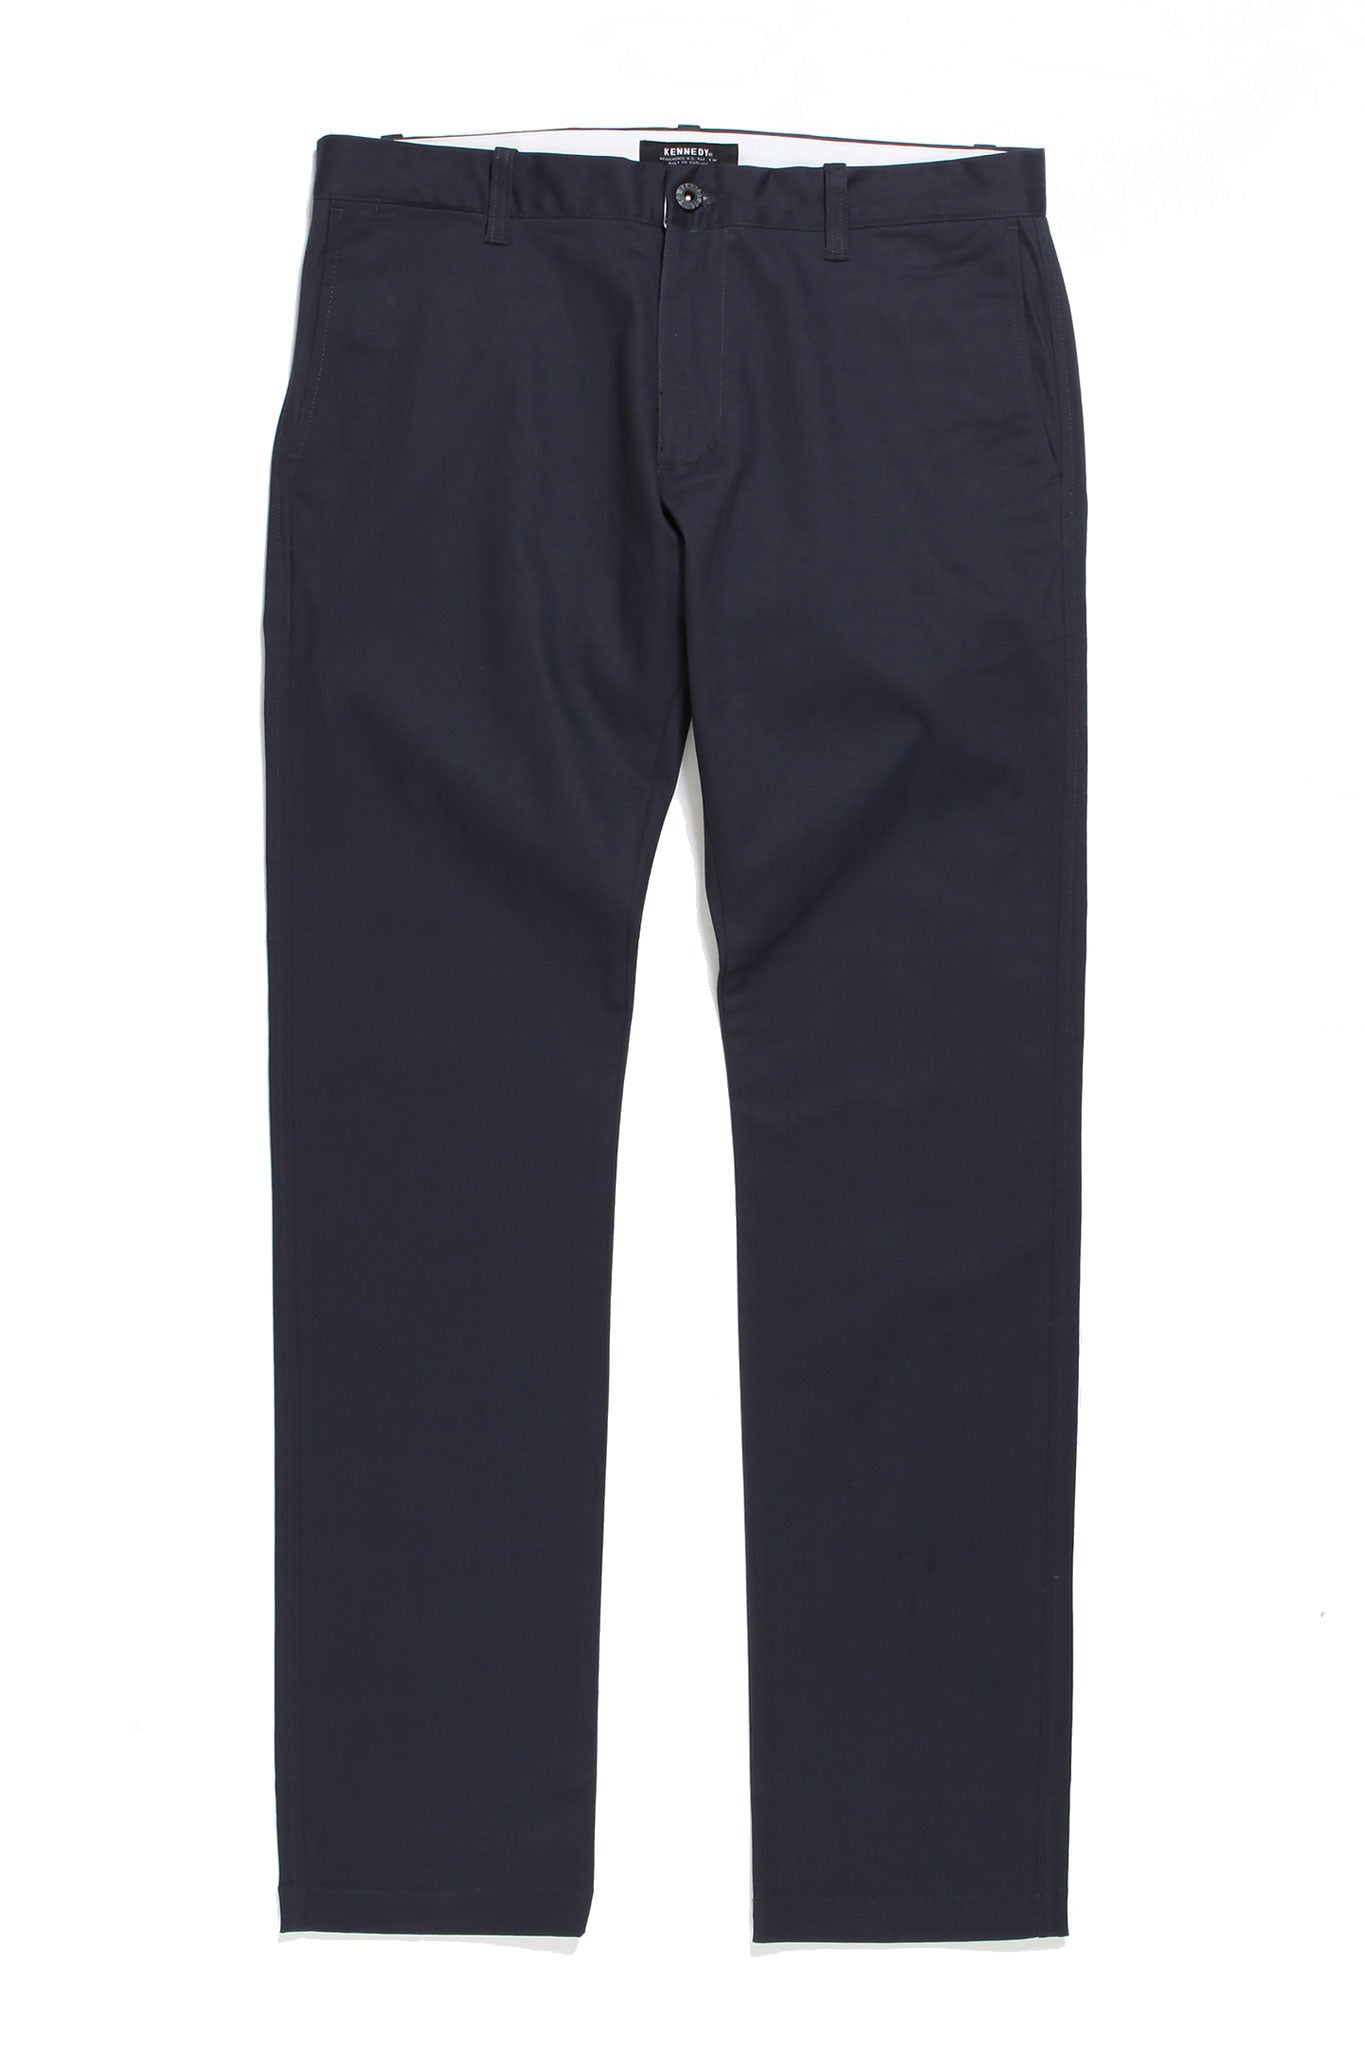 The New Surplus Chino Pant - Navy | KENNEDY MFG. CO